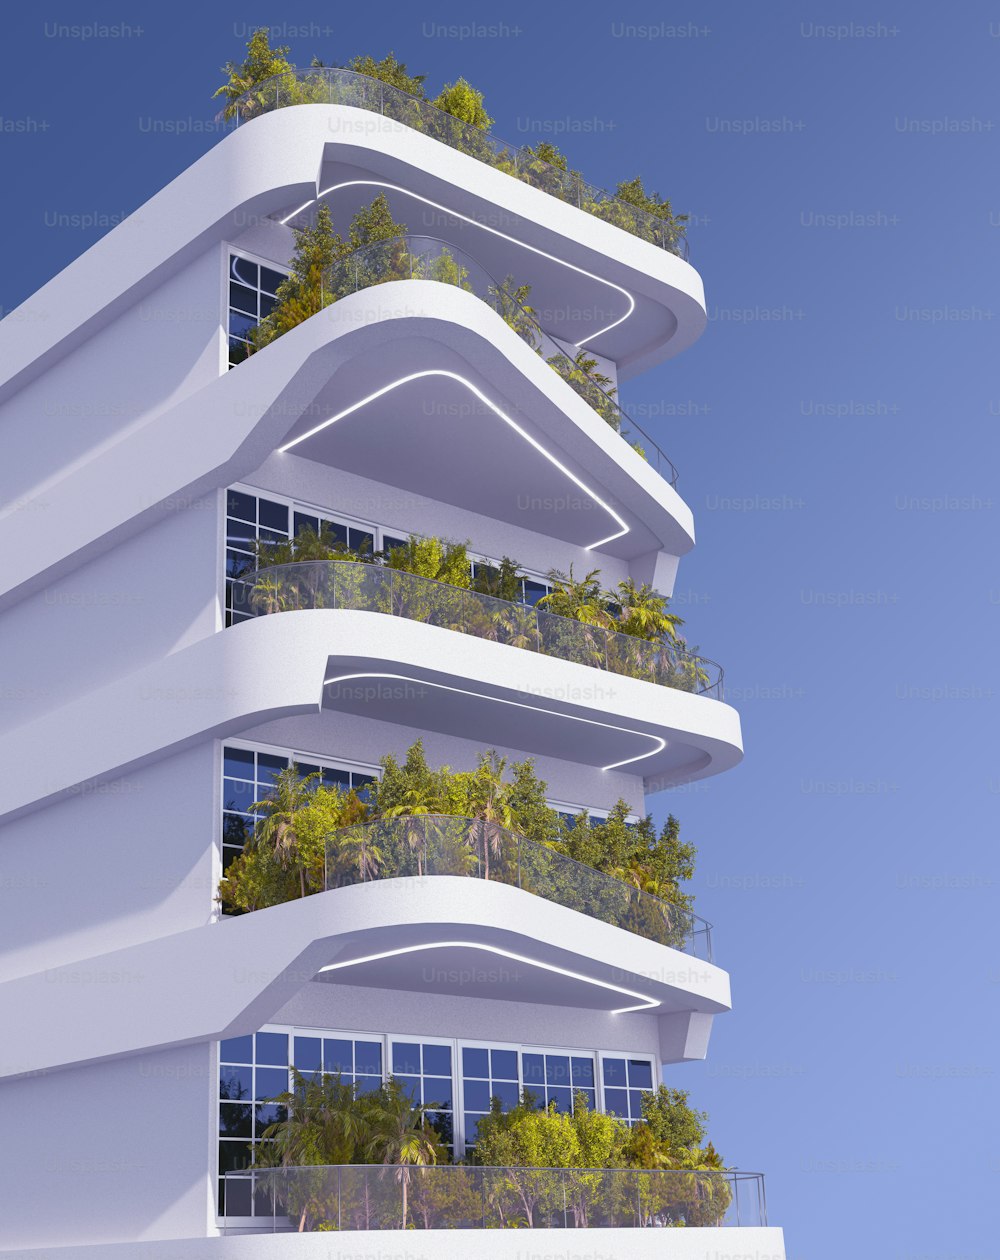 a tall white building with plants growing on the balconies